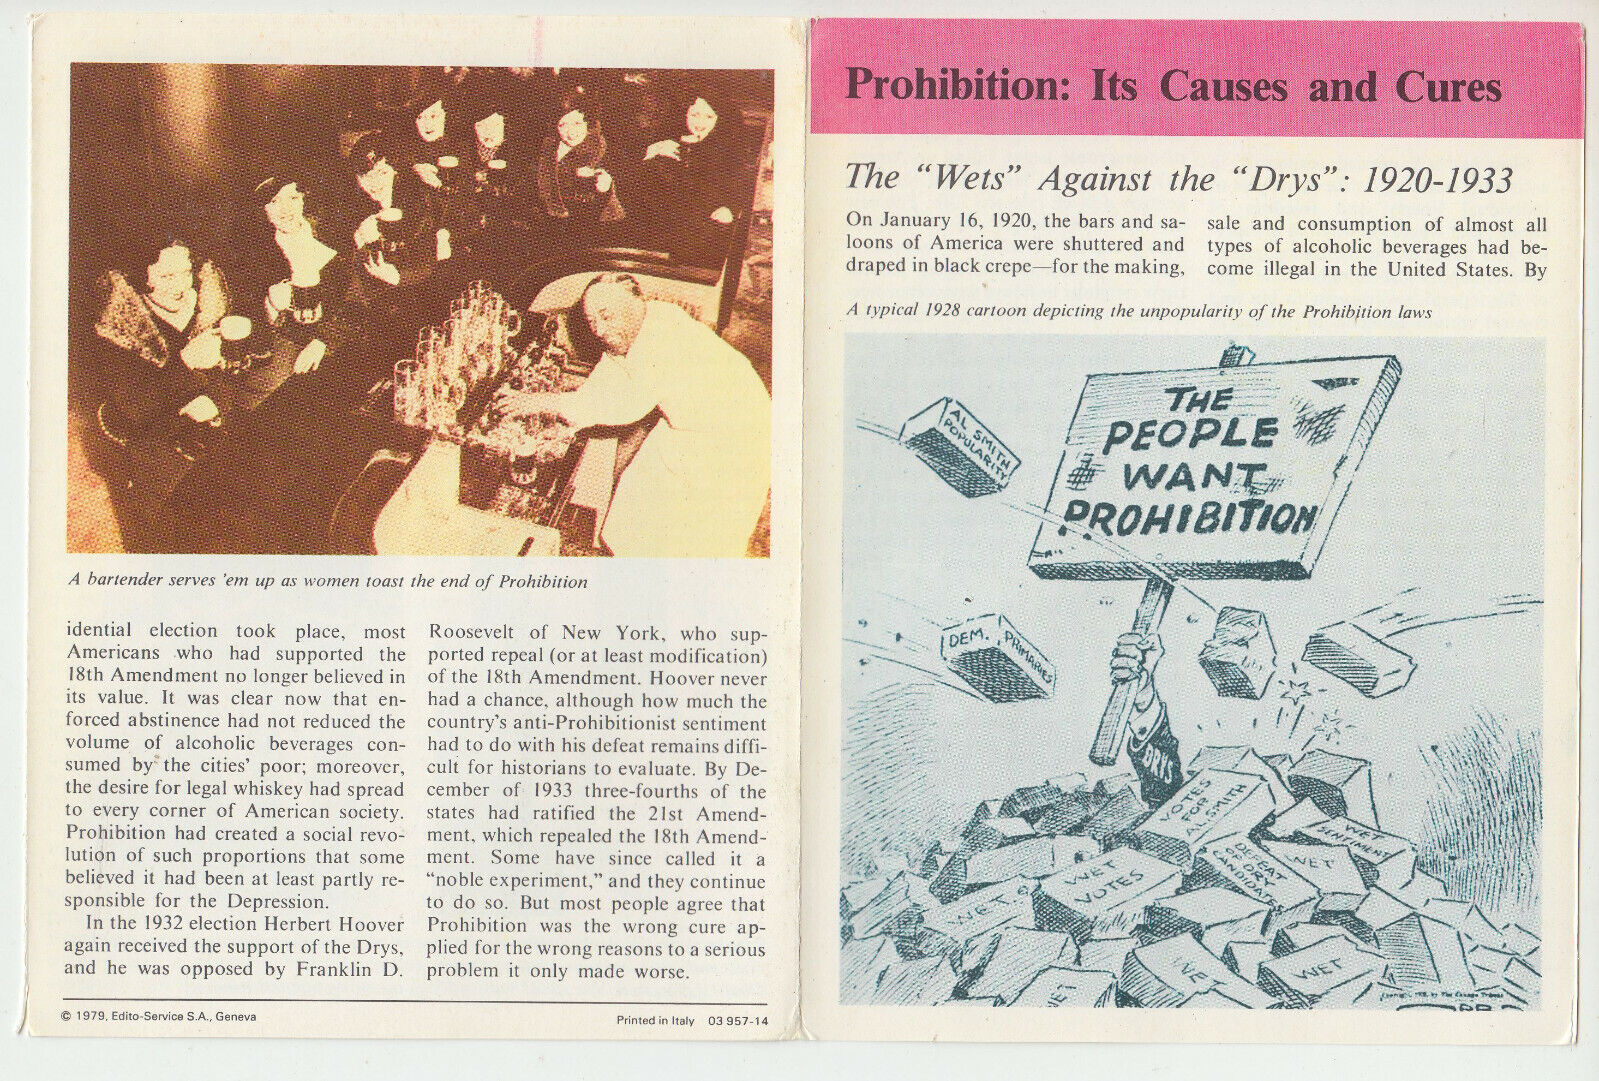 PROHIBITION: ITS CAUSES AND CURES 1920-33 HIstory 1979 STORY OF AMERICA BOOKLET